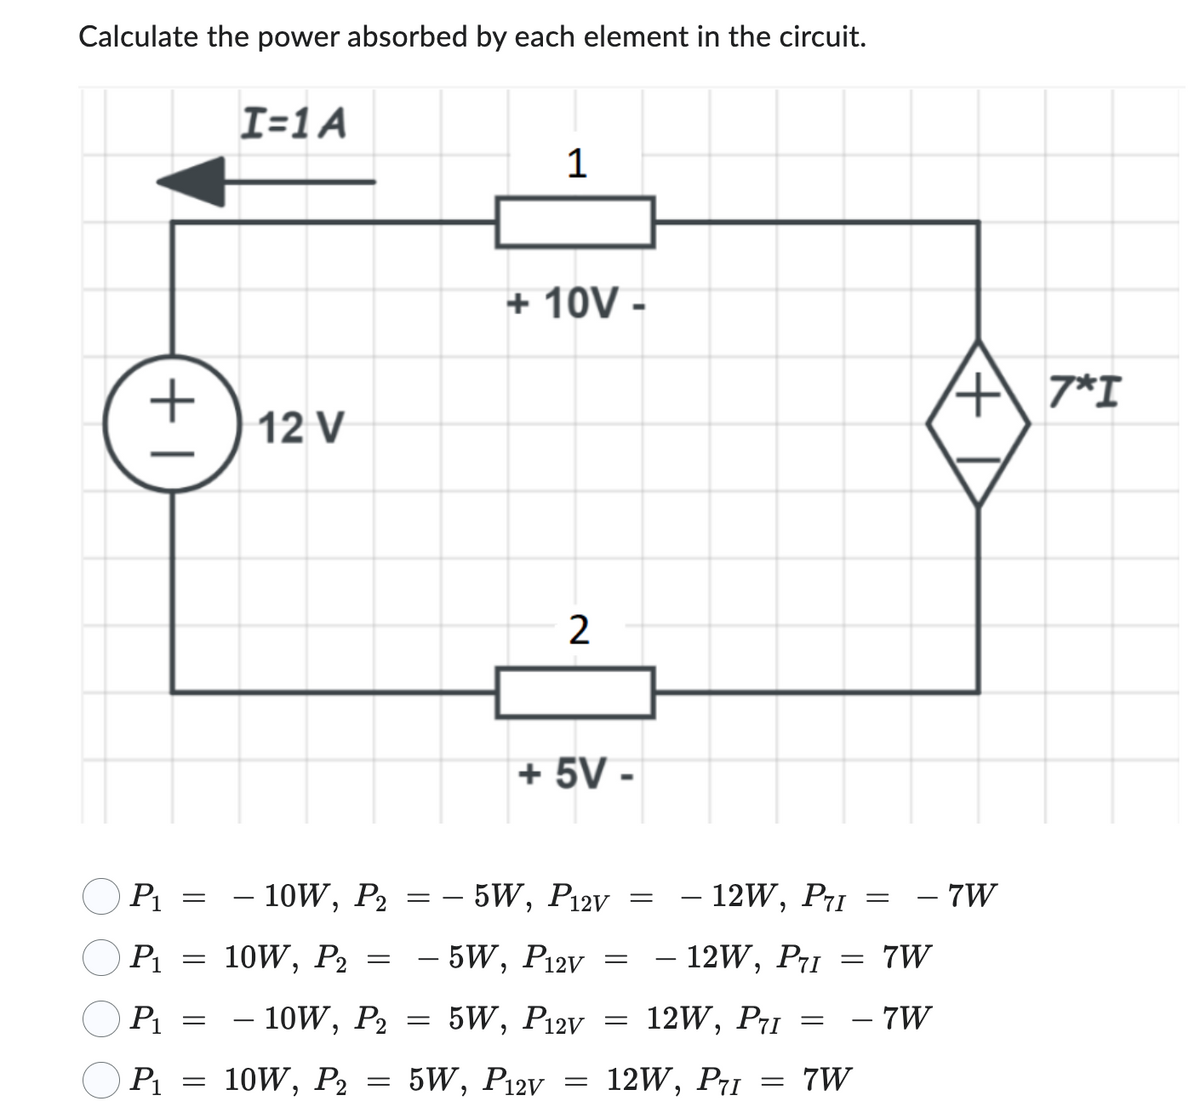 Calculate the power absorbed by each element in the circuit.
+1
P₁
=
=
I=1A
=
12 V
- 10W, P₂
10W, P₂
=
=
=
1
+ 10V -
- 5W,
P12V =
P₁ 10W, P₂
P₁ = 10W, P2 = 5W, P12V =
5W,
P12V
P₁
2
+ 5V-
– 5W, P12V
=
=
- 12W, P71
- 12W, P₁
12W, P₁1 =
12W,
= 7W
PTI = 7W
7W
4 7*1
7W